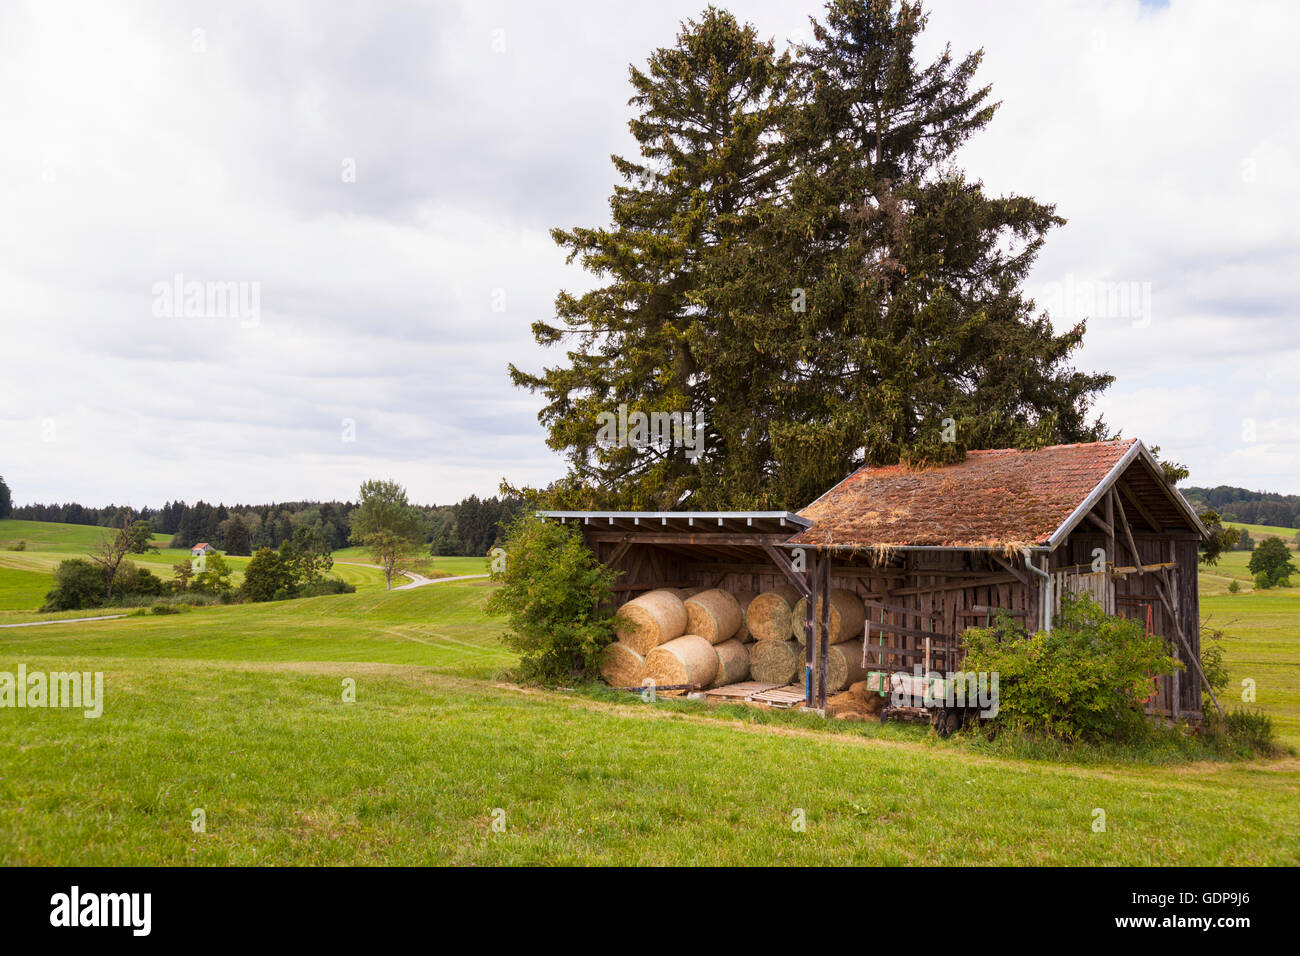 Field landscape with haystacks in traditional barn Stock Photo